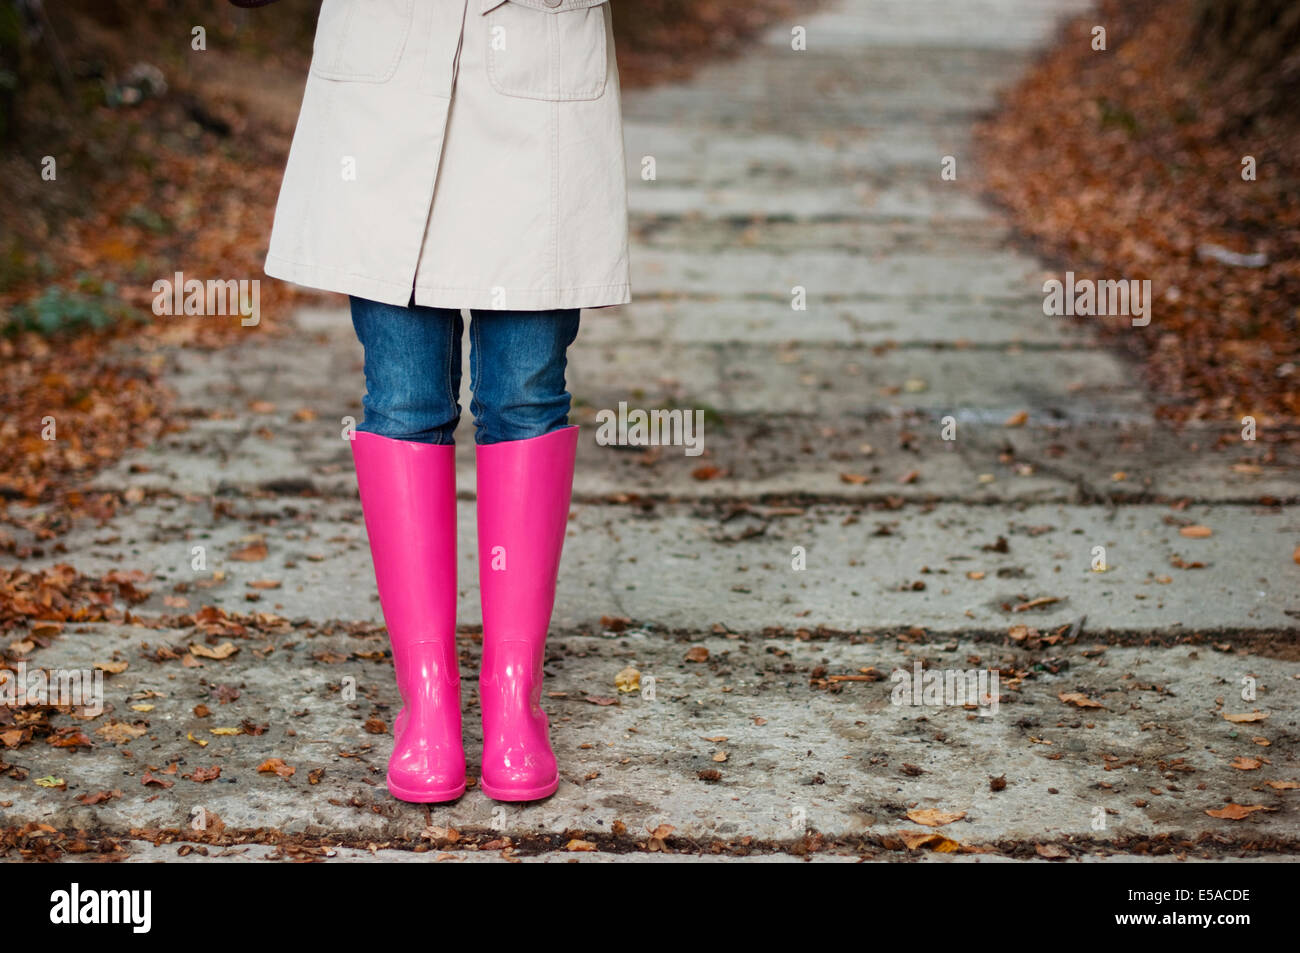 Woman wearing rubber boots, Debica, Poland. Stock Photo